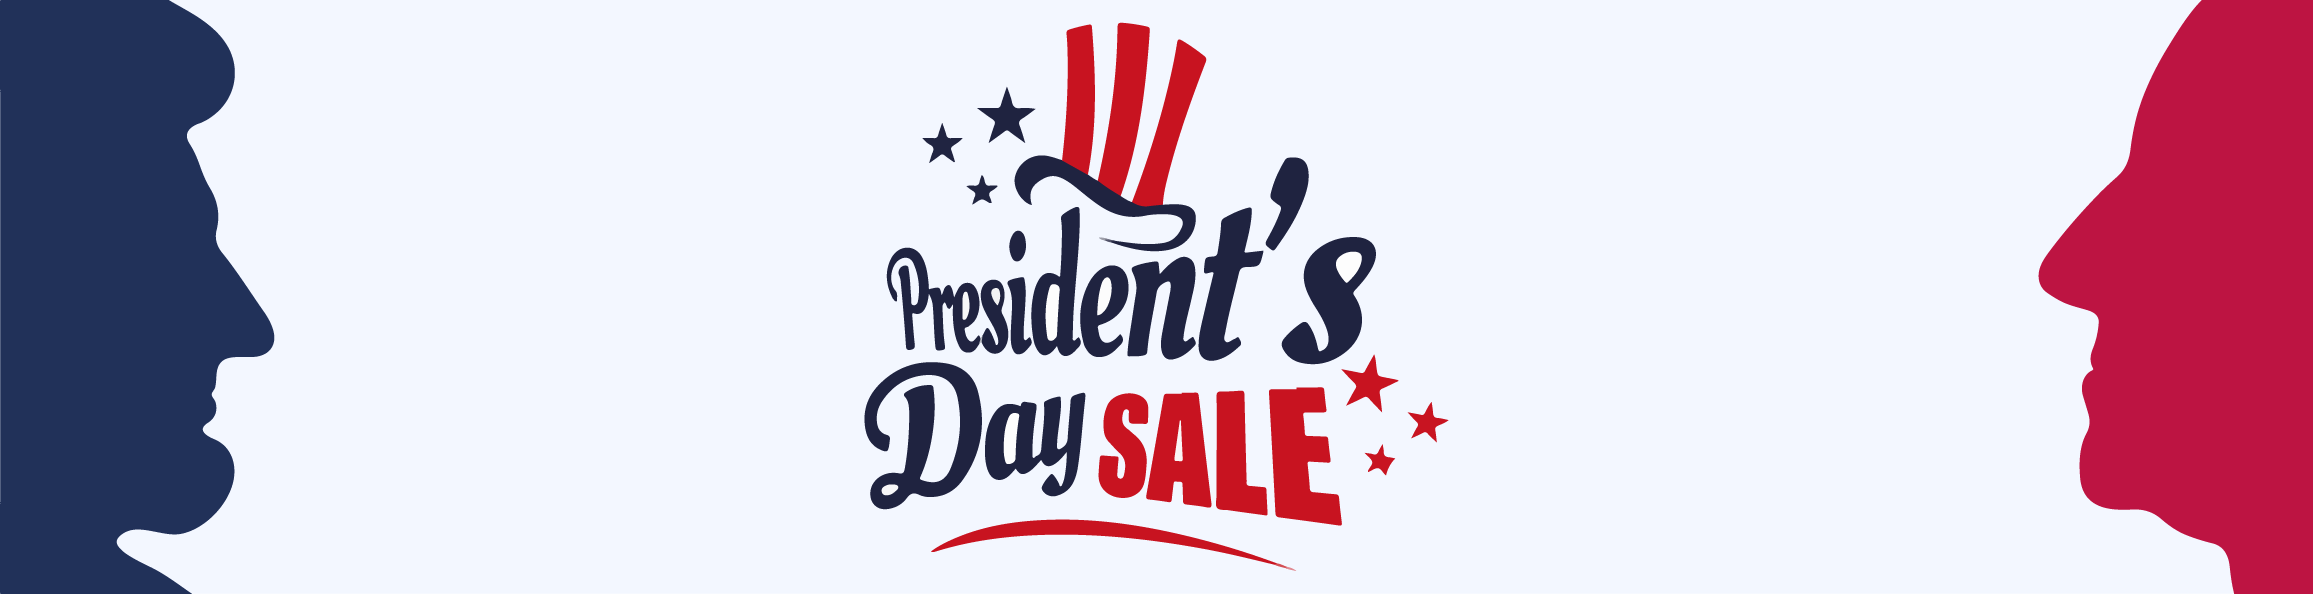 Presidents Day Sales 2021